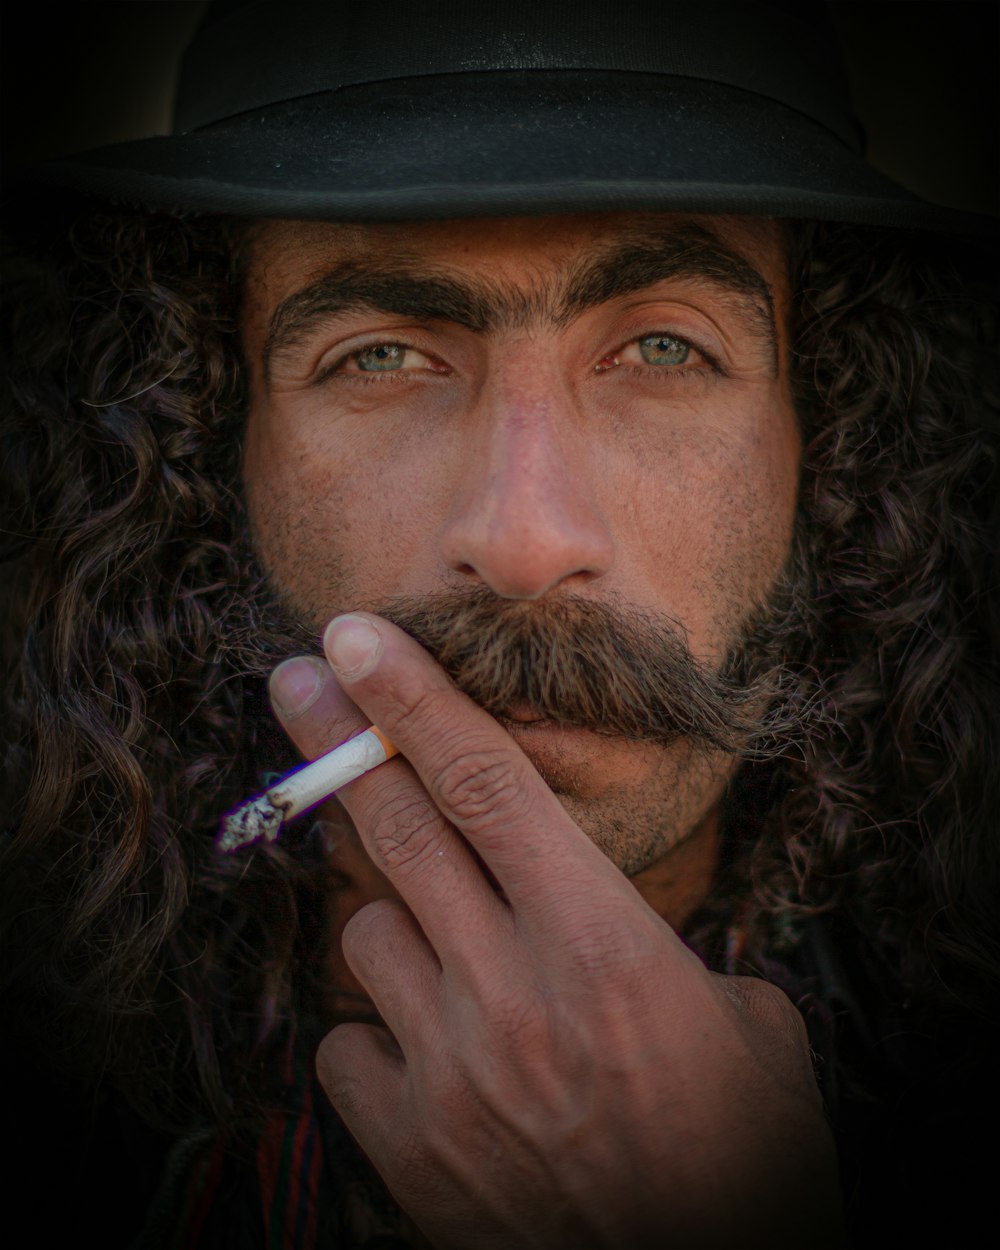 a man with long curly hair wearing a hat and holding a cigarette